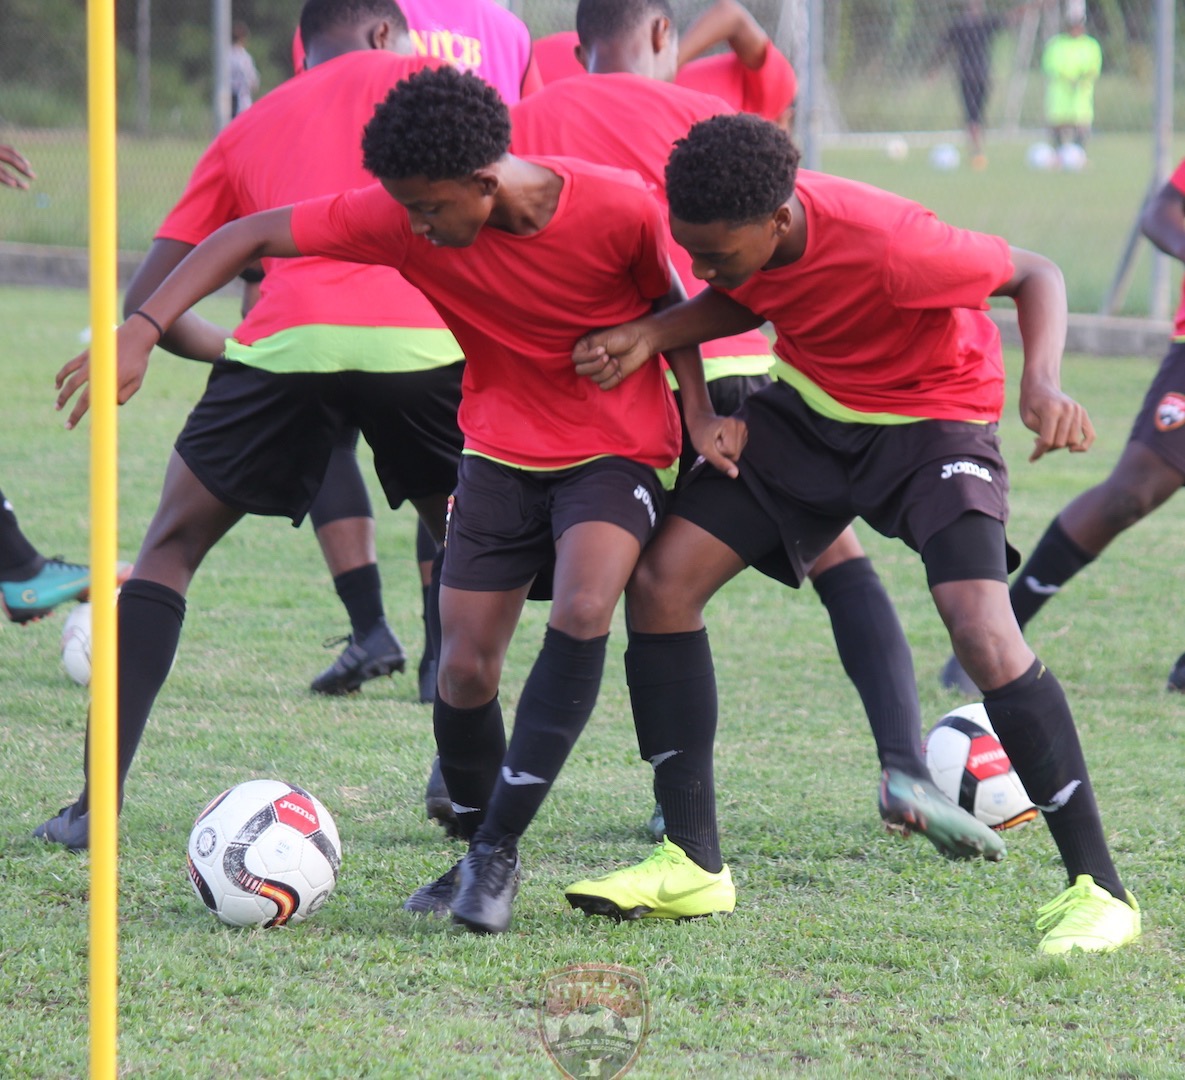 T&T to face Costa Rica in CONCACAF U-15 opener tomorrow.